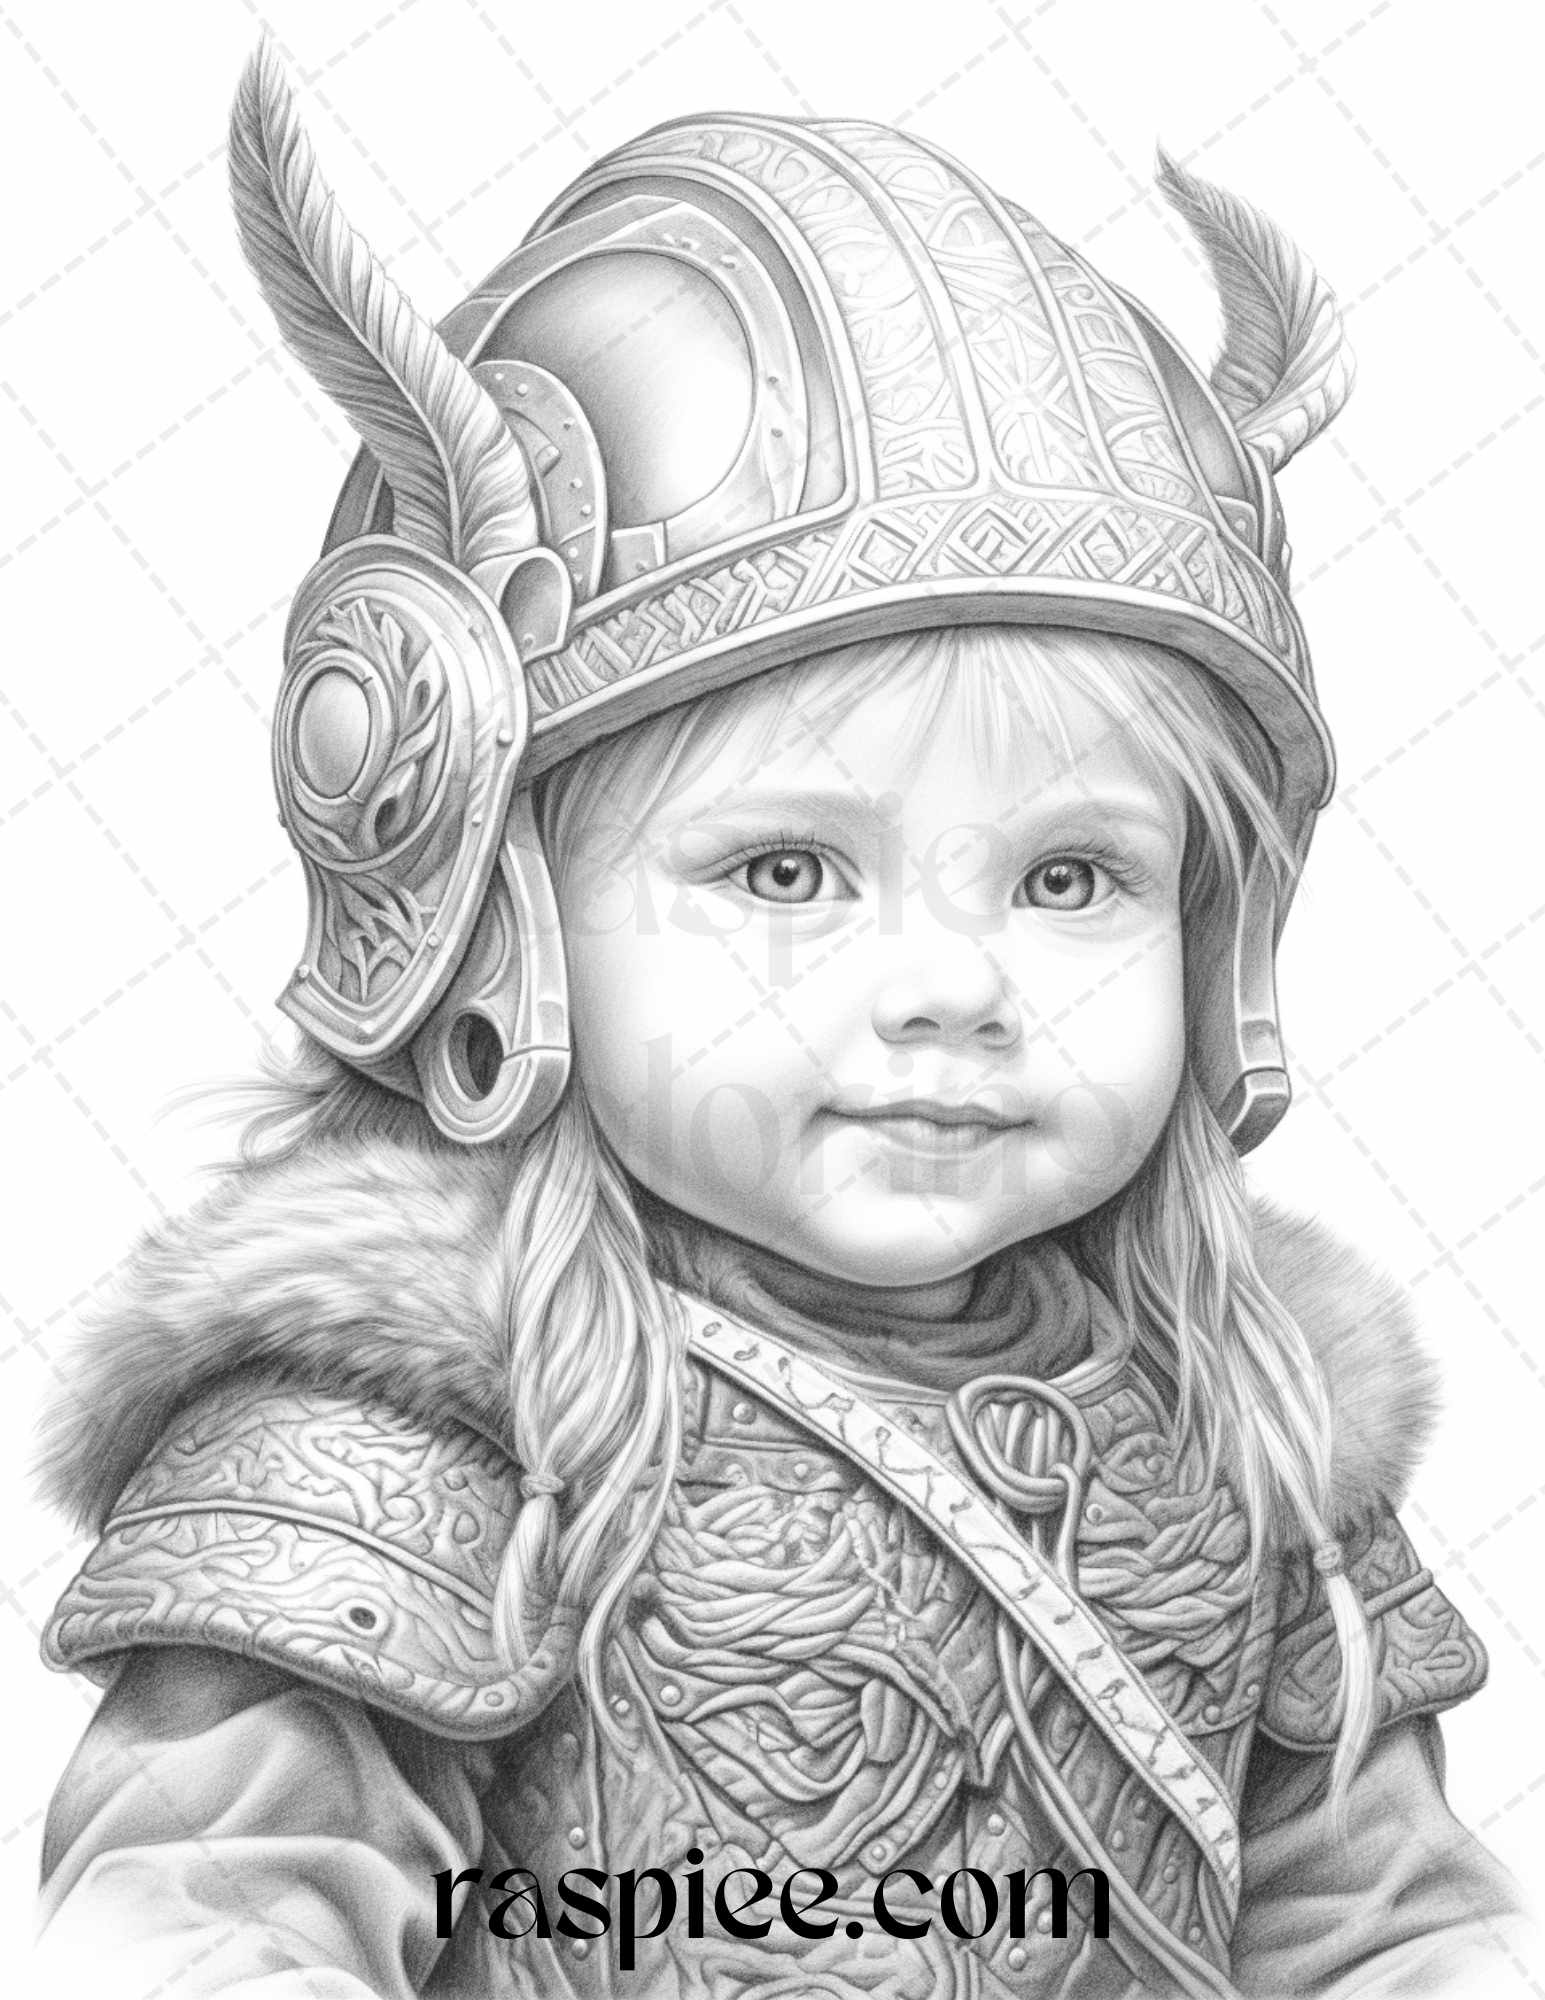 Printable Little Viking Grayscale Coloring Page, DIY Boys and Girls Portrait Coloring Sheet, Nordic Theme Kids Coloring Activity, Instant Download Viking Coloring Page, Fun Grayscale Coloring Printable